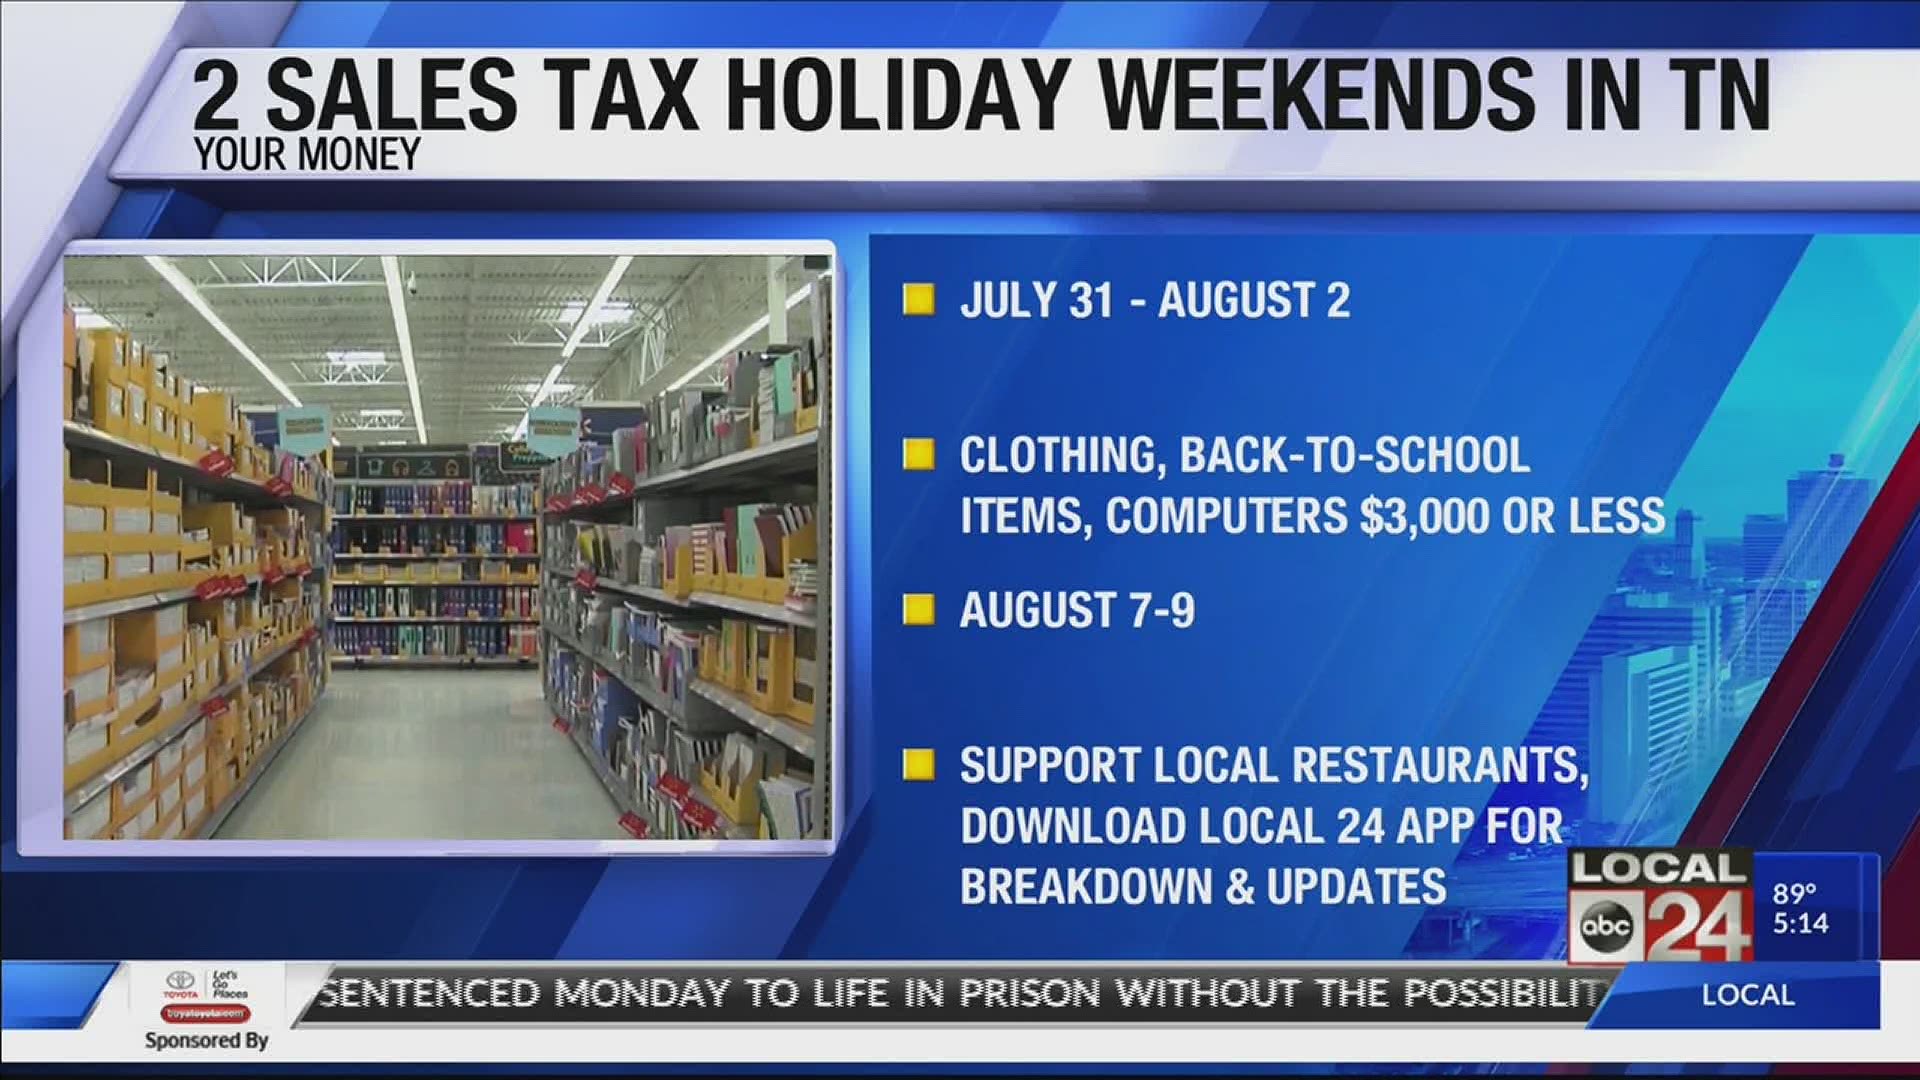 One sales tax holiday runs July 31 – August 2, 2020, the other August 7 – August 9.